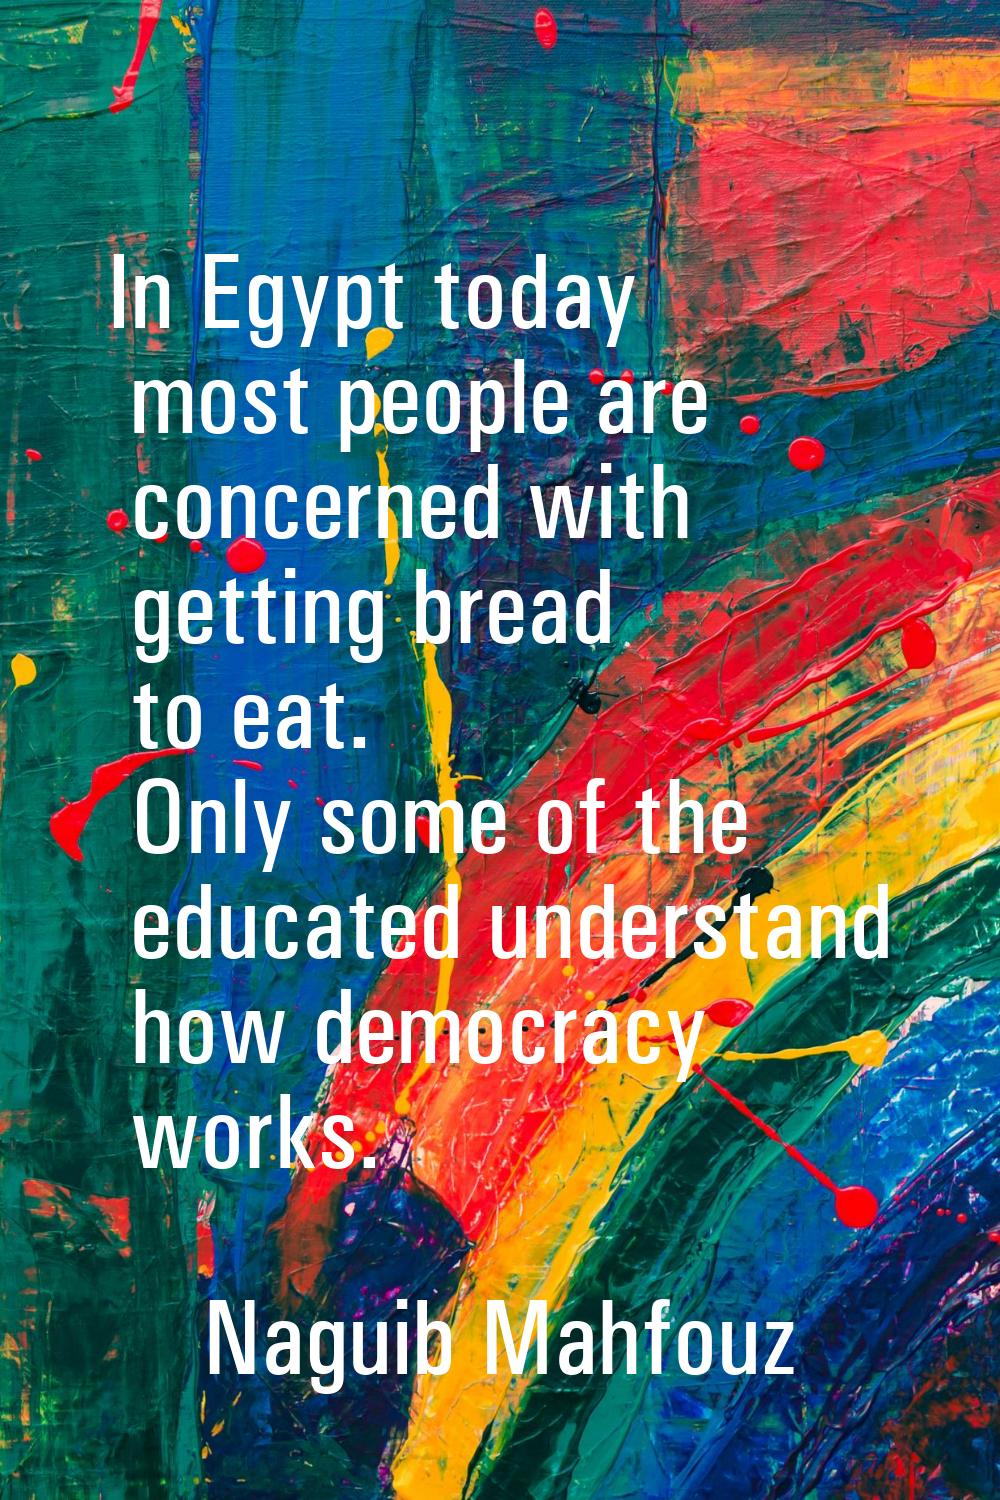 In Egypt today most people are concerned with getting bread to eat. Only some of the educated under